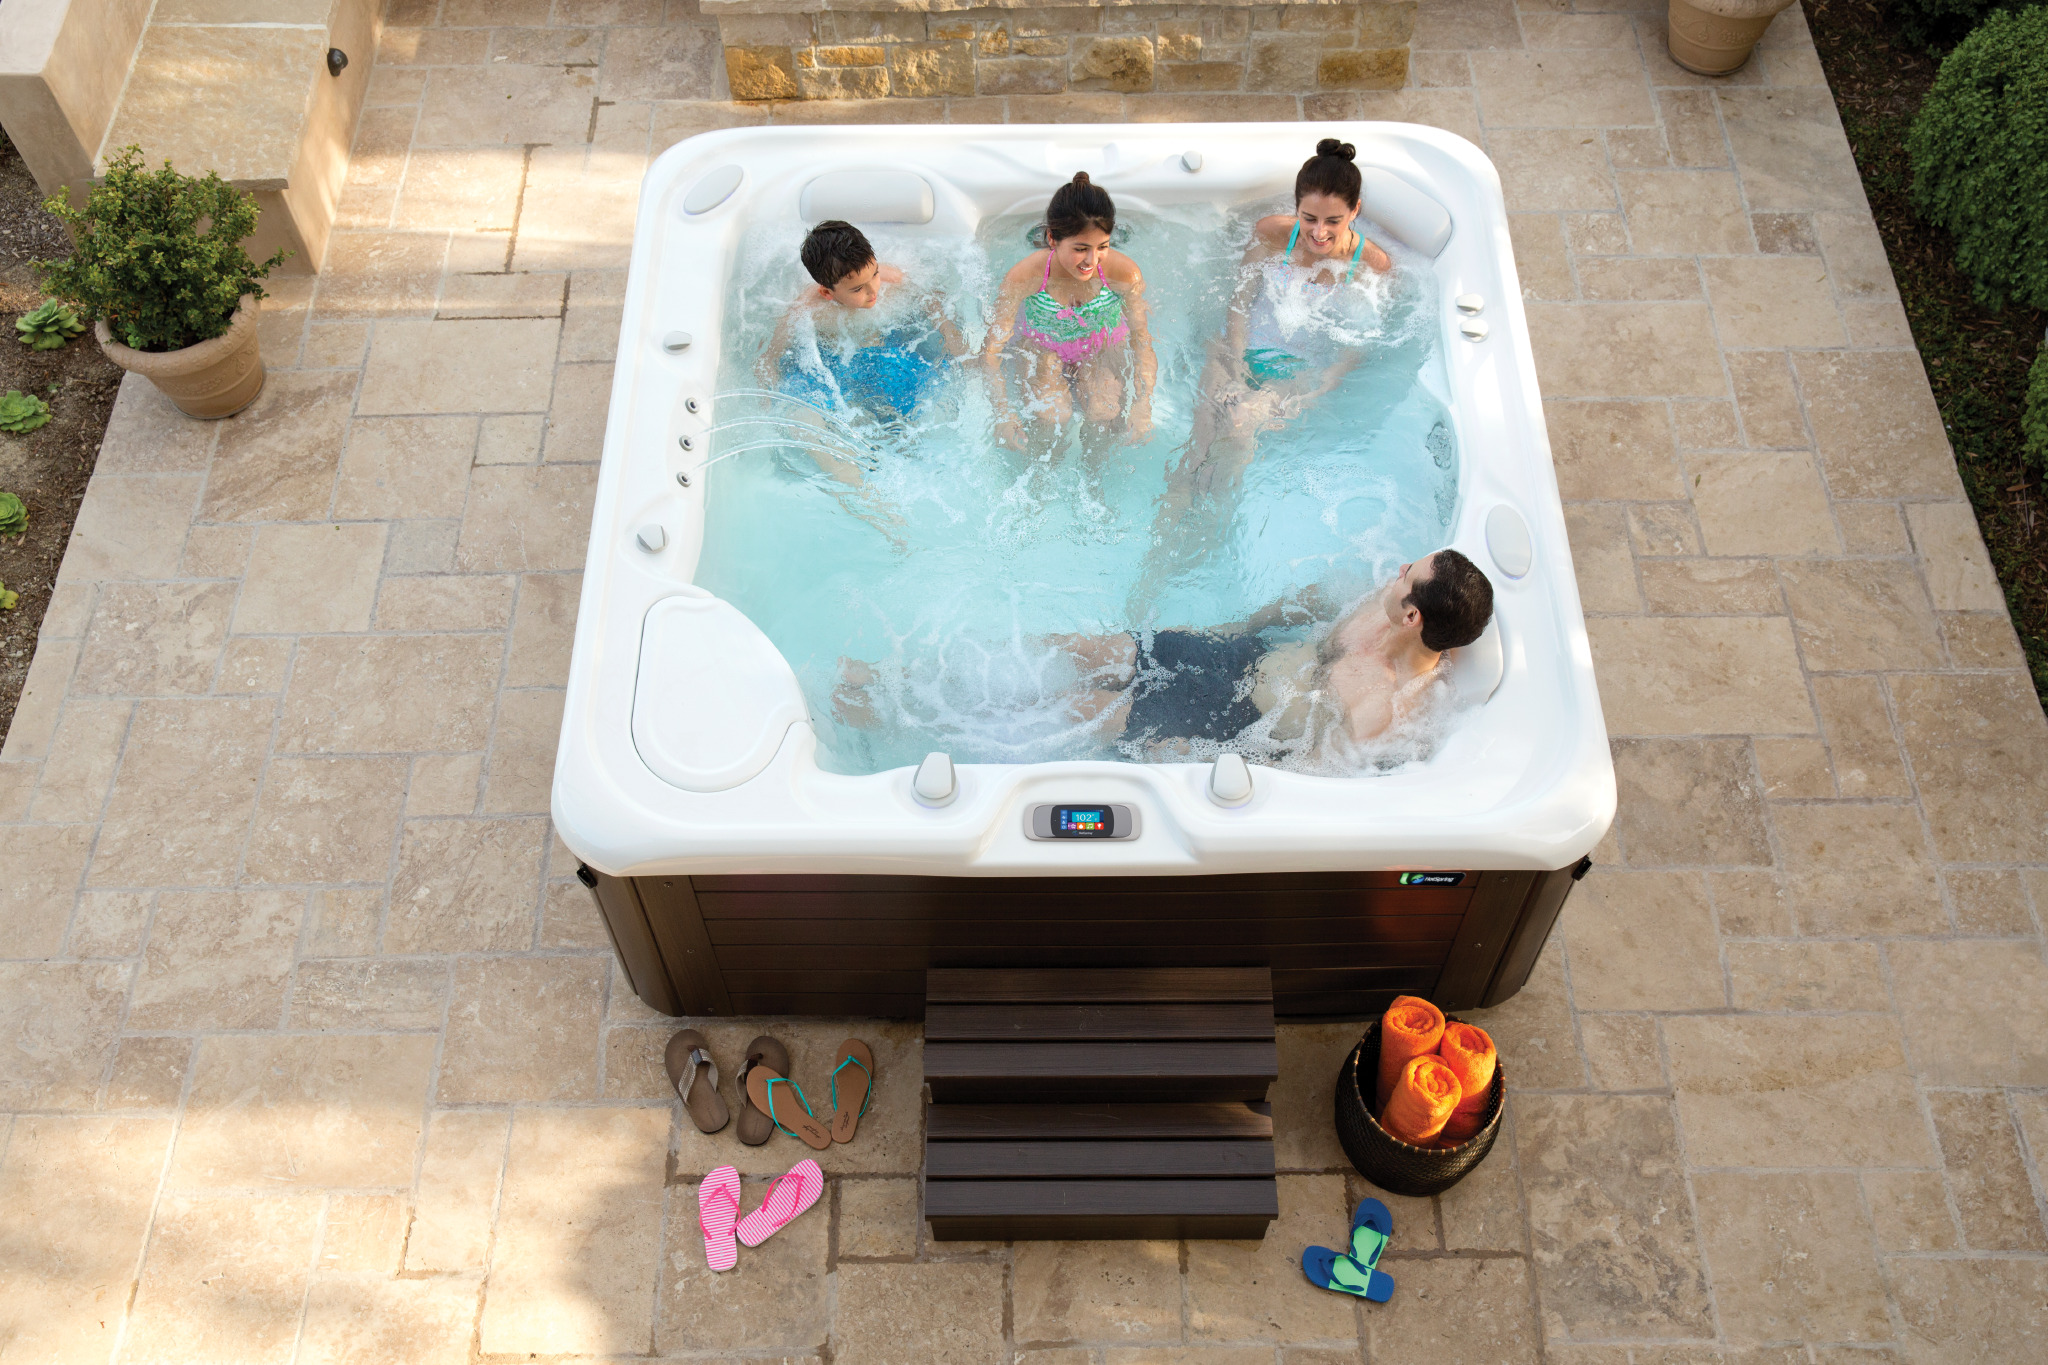 Hot Tubs brands that are Perfect for Families